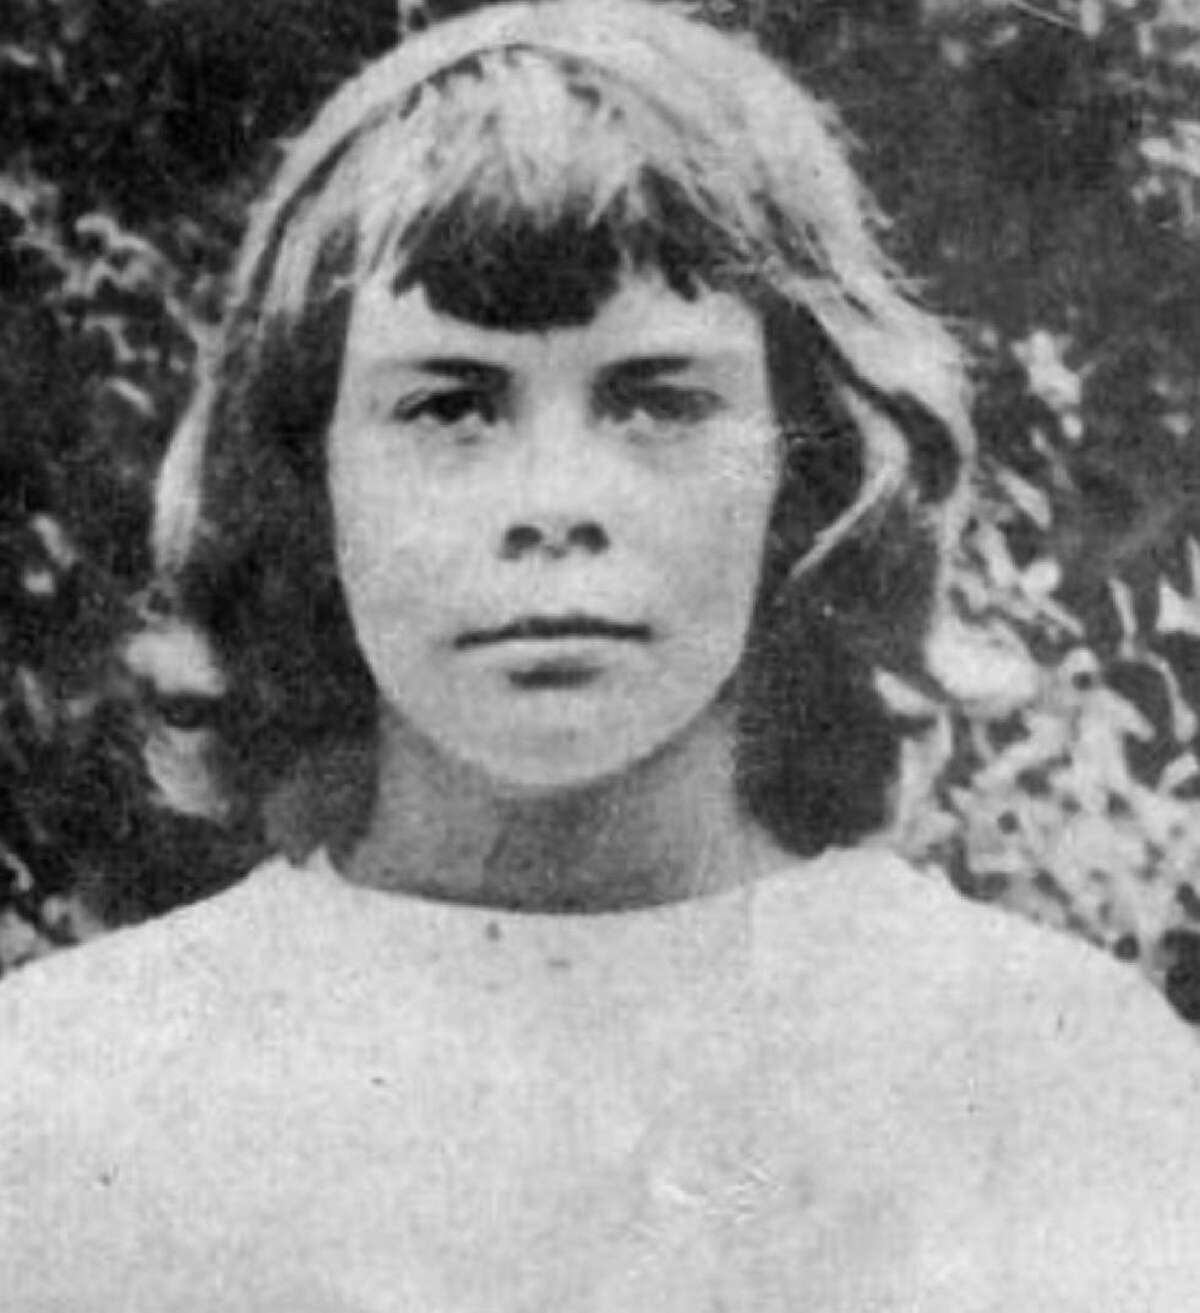 The disappearance of Connie Smith in 1956 remains unsolved to this day. Above, a detail of a photo was shown of 10-year-old Connie Smith, who disappeared July 16, 1952, and was not seen since. Smith had been a summer camper at Camp Sloane at 124 Indian Mountain Road in Lakeville. A former Wyoming Governor’s granddaughter, Smith was last seen at the intersection of Route 44 and Belgo Road after she decided to walk to Lakeville from the camp.